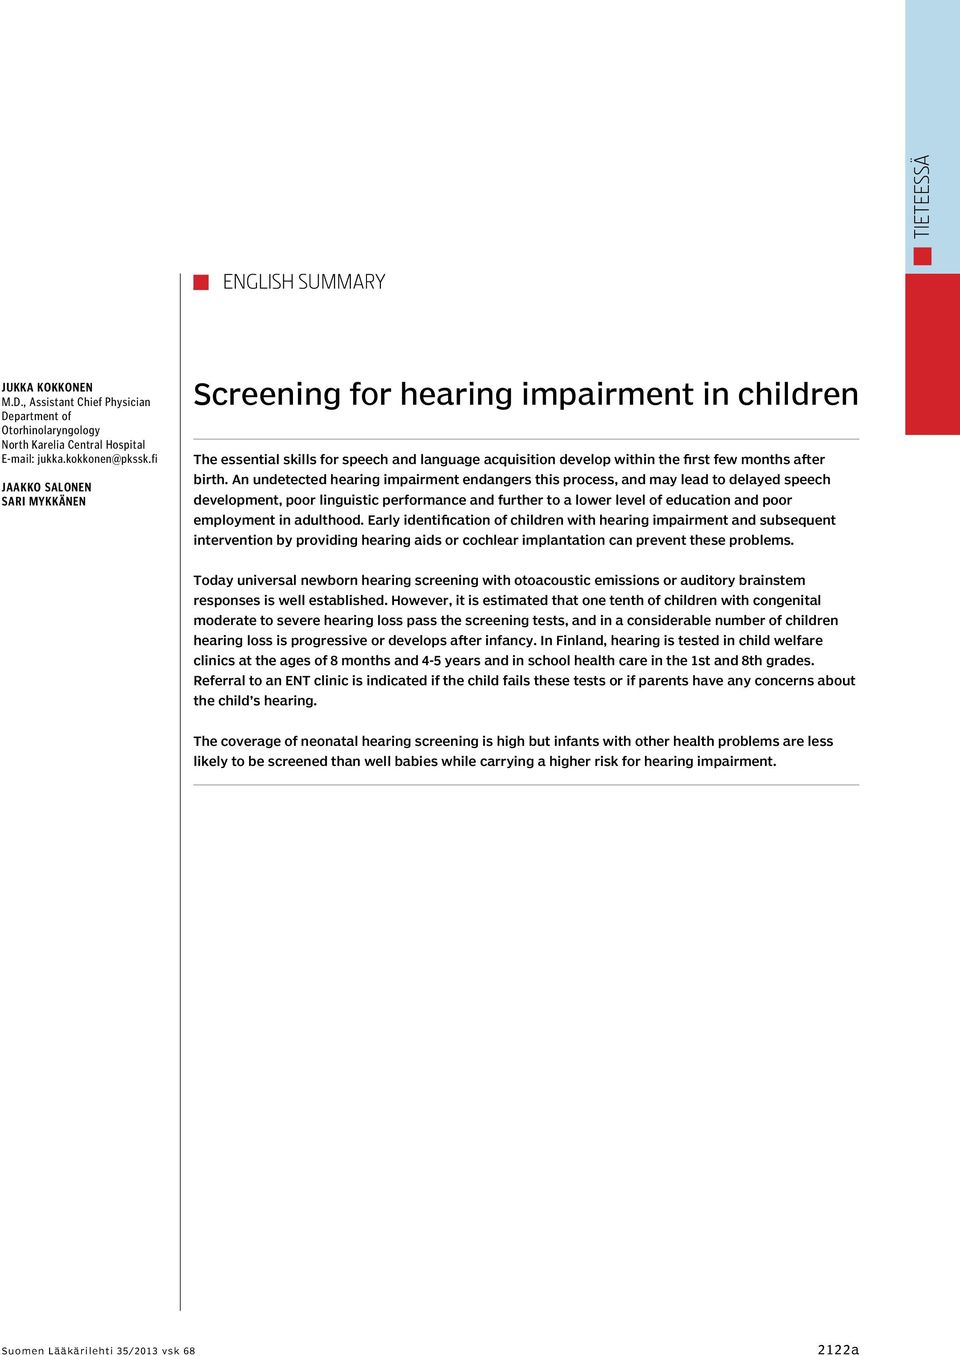 An undetected hearing impairment endangers this process, and may lead to delayed speech development, poor linguistic performance and further to a lower level of education and poor employment in